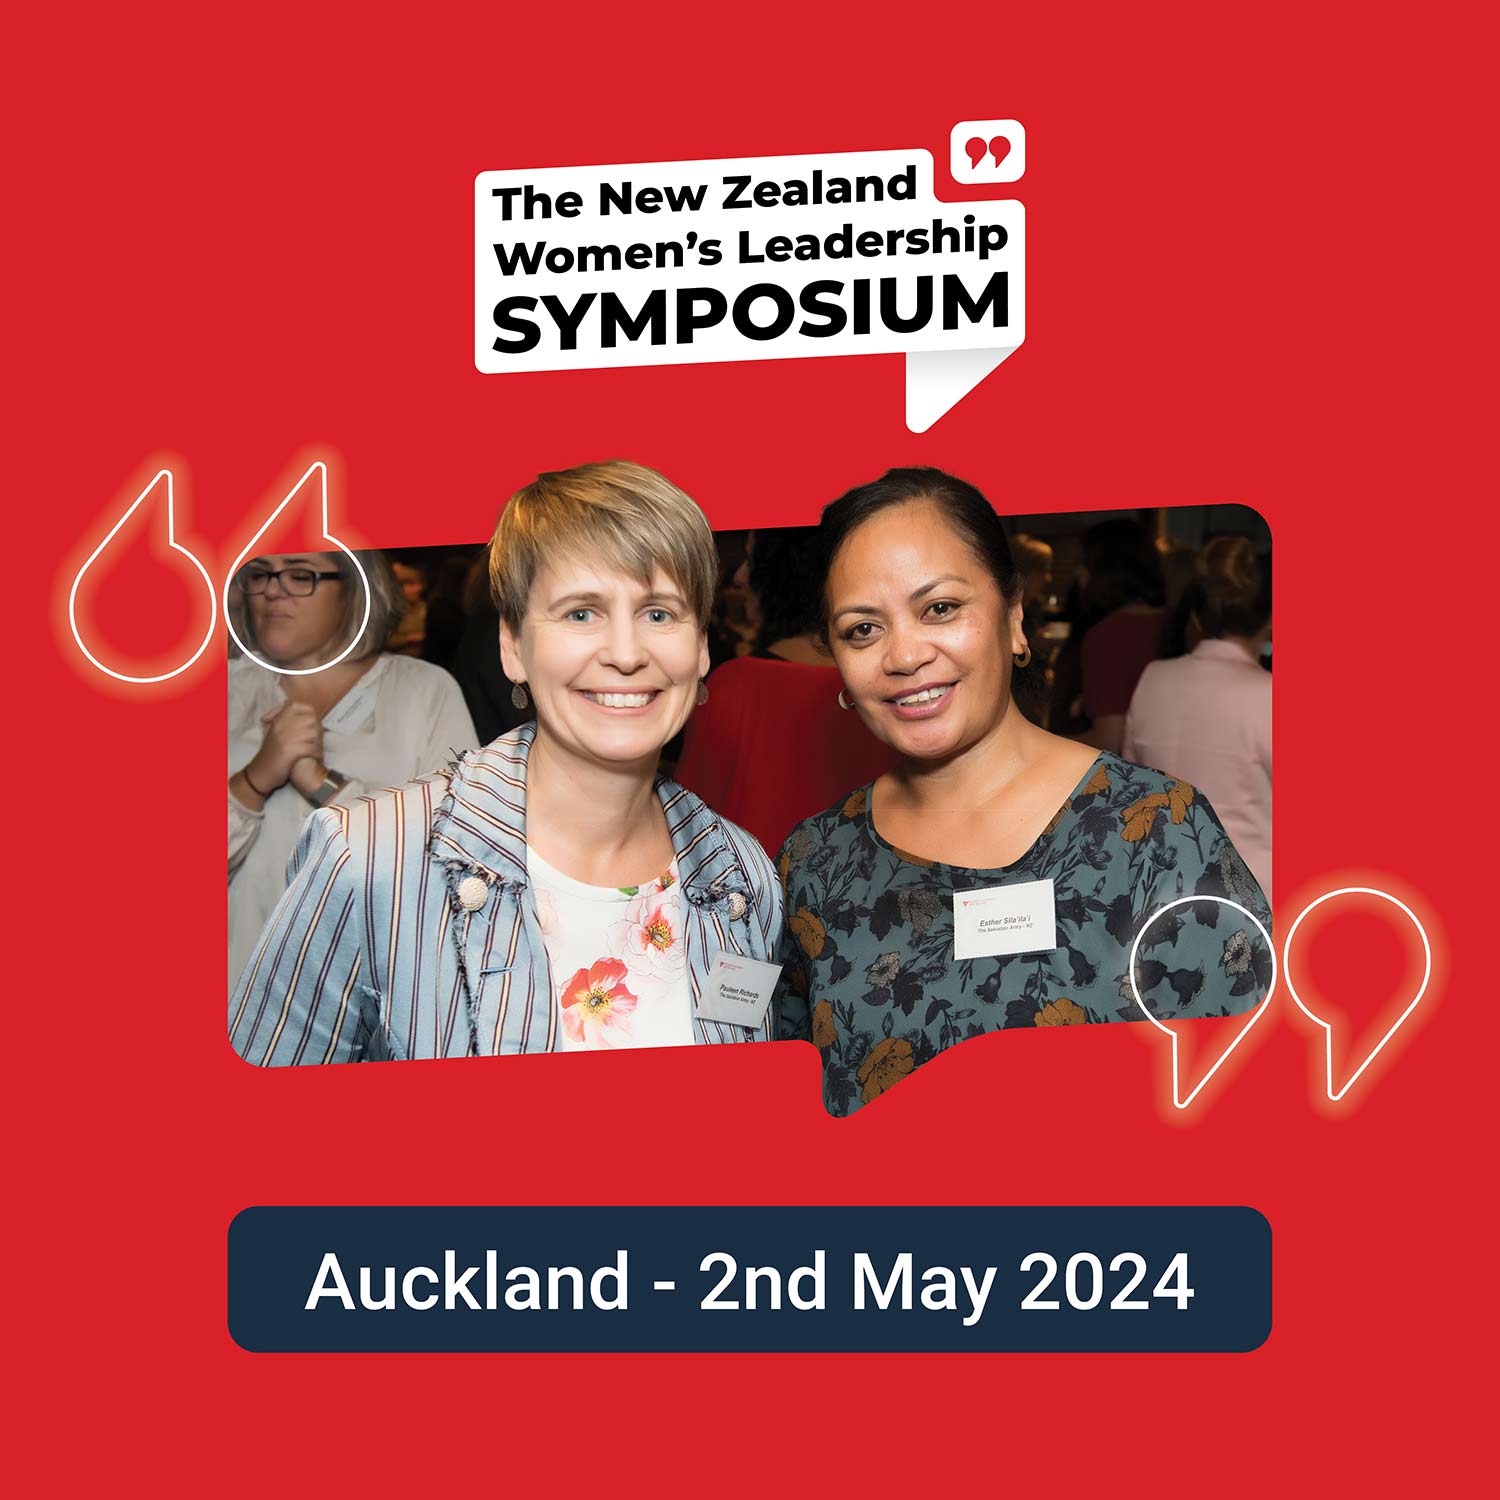 The New Zealand Women's Leadership Symposium Auckland 2nd May 2024